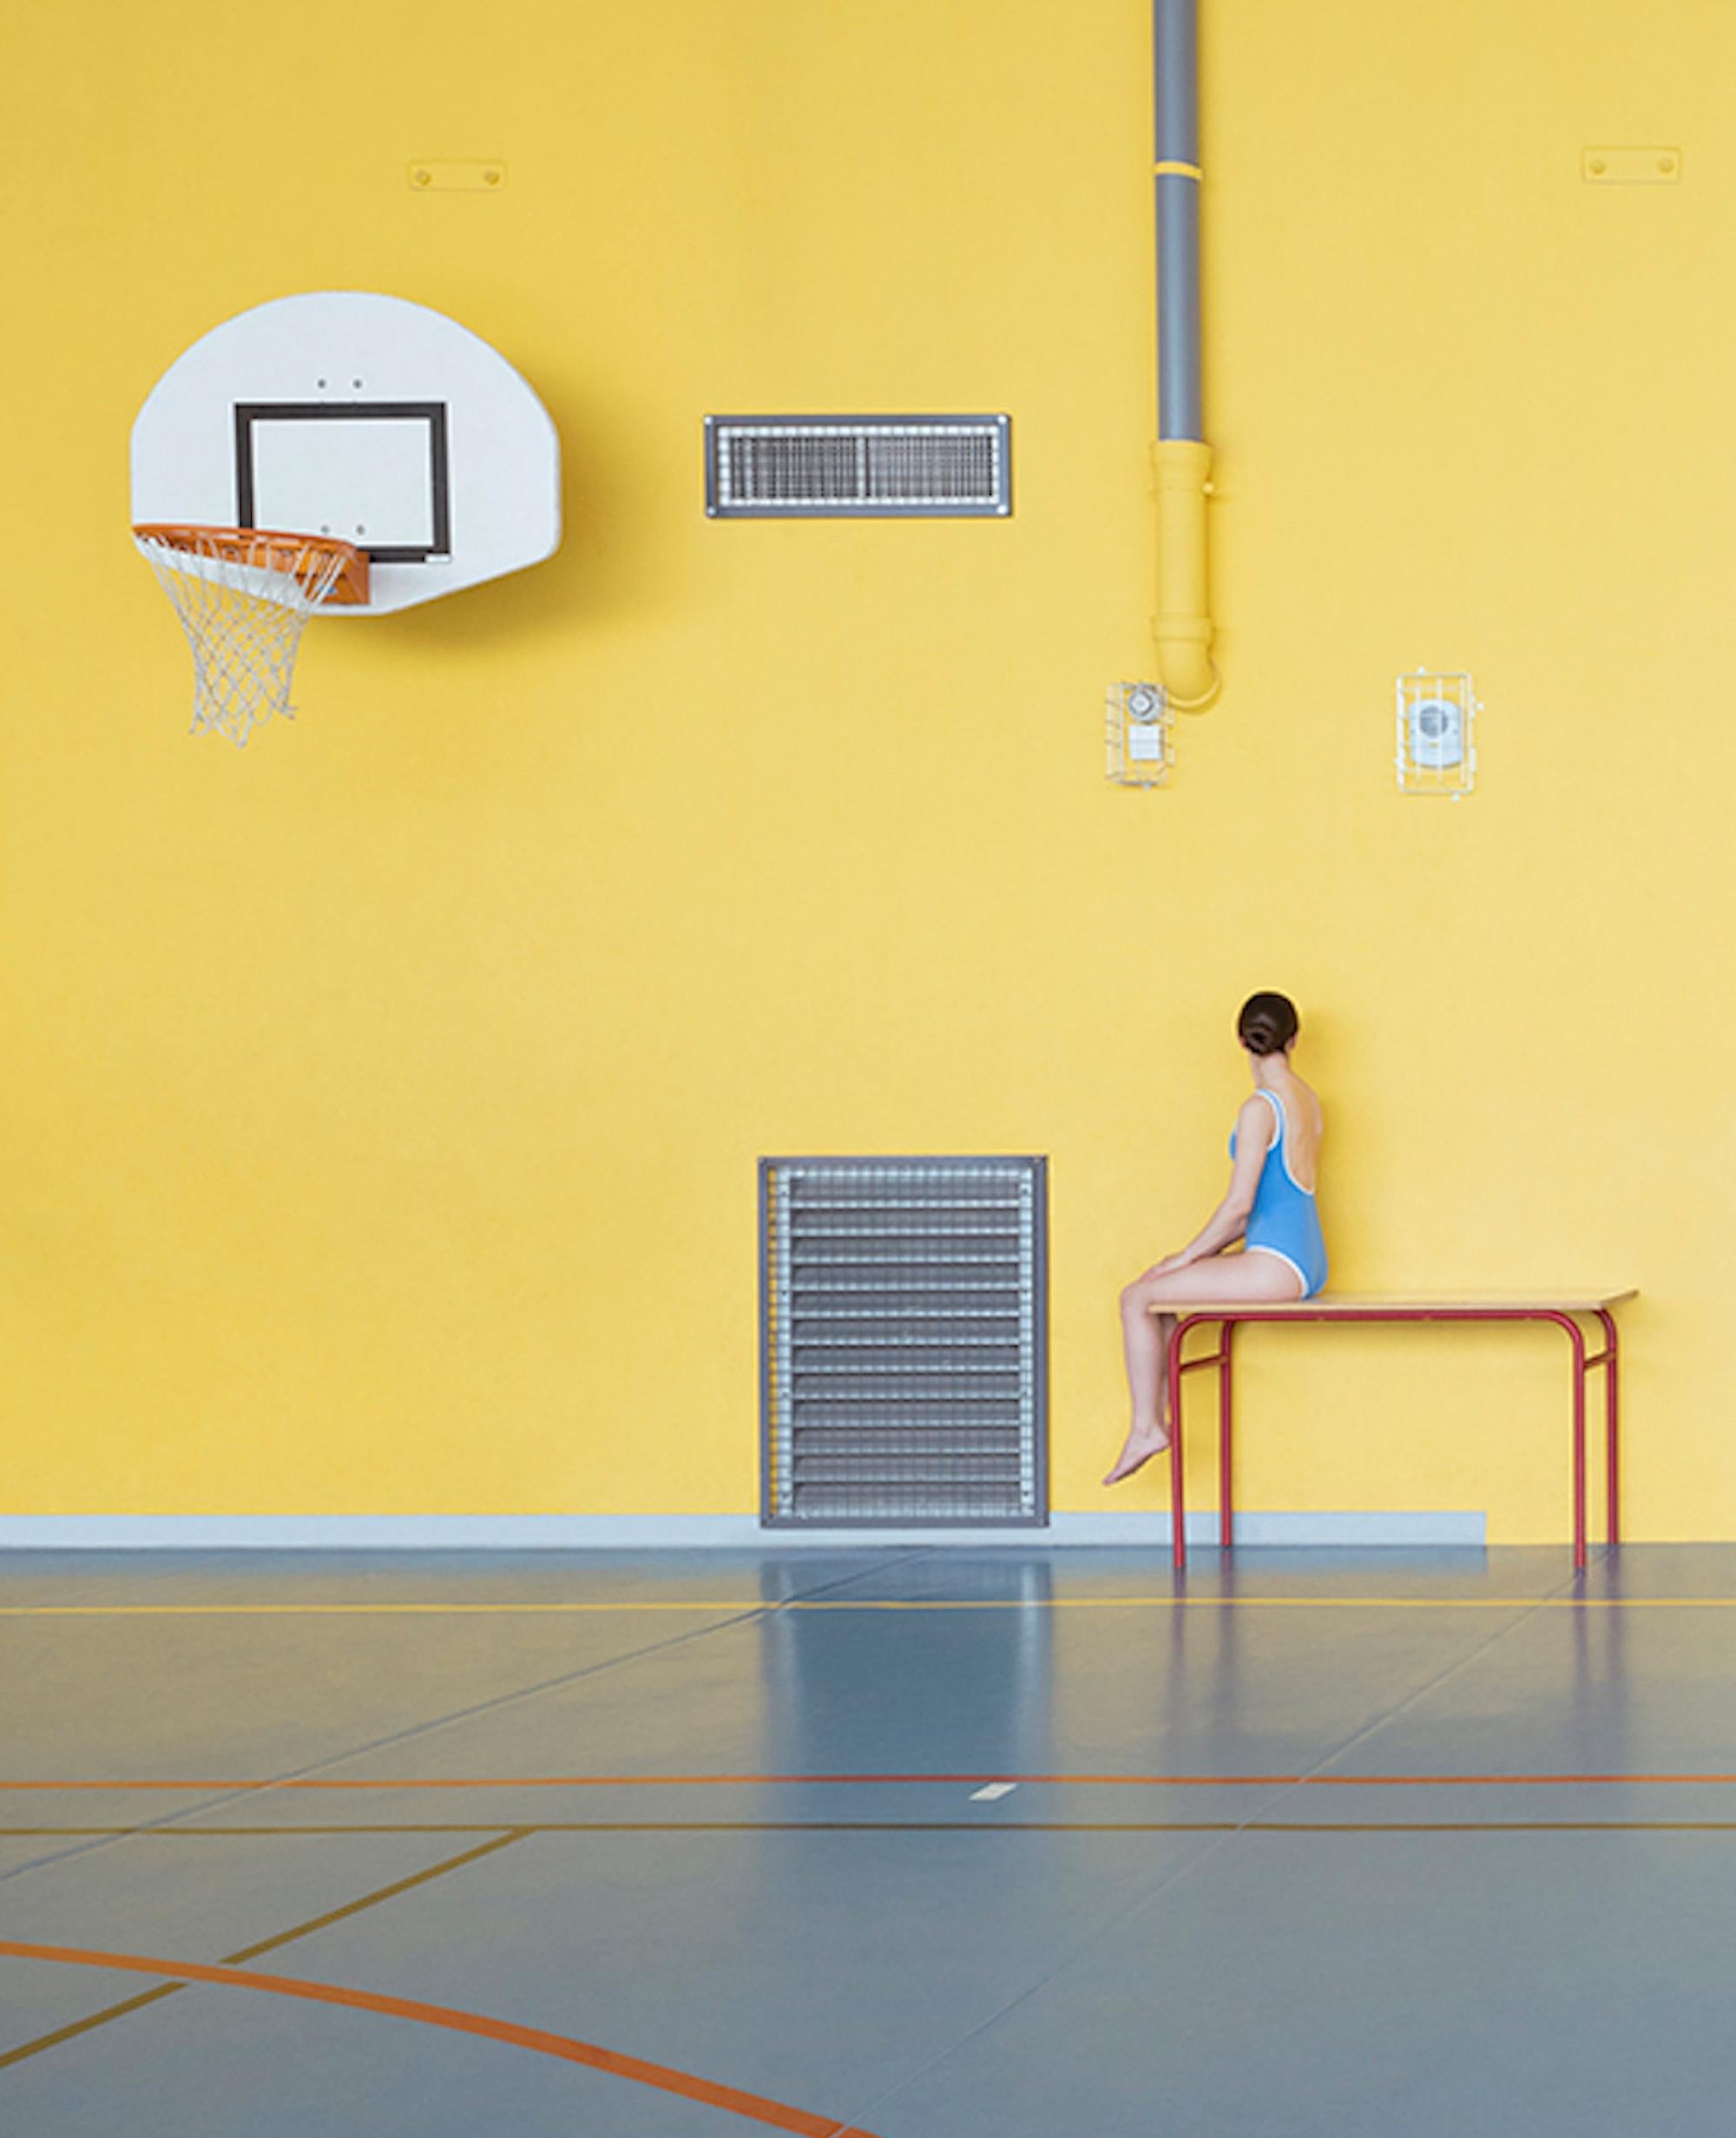 Alter n°4 by Camille Brasselet - Contemporary fine art photography, sport, gym For Sale 2